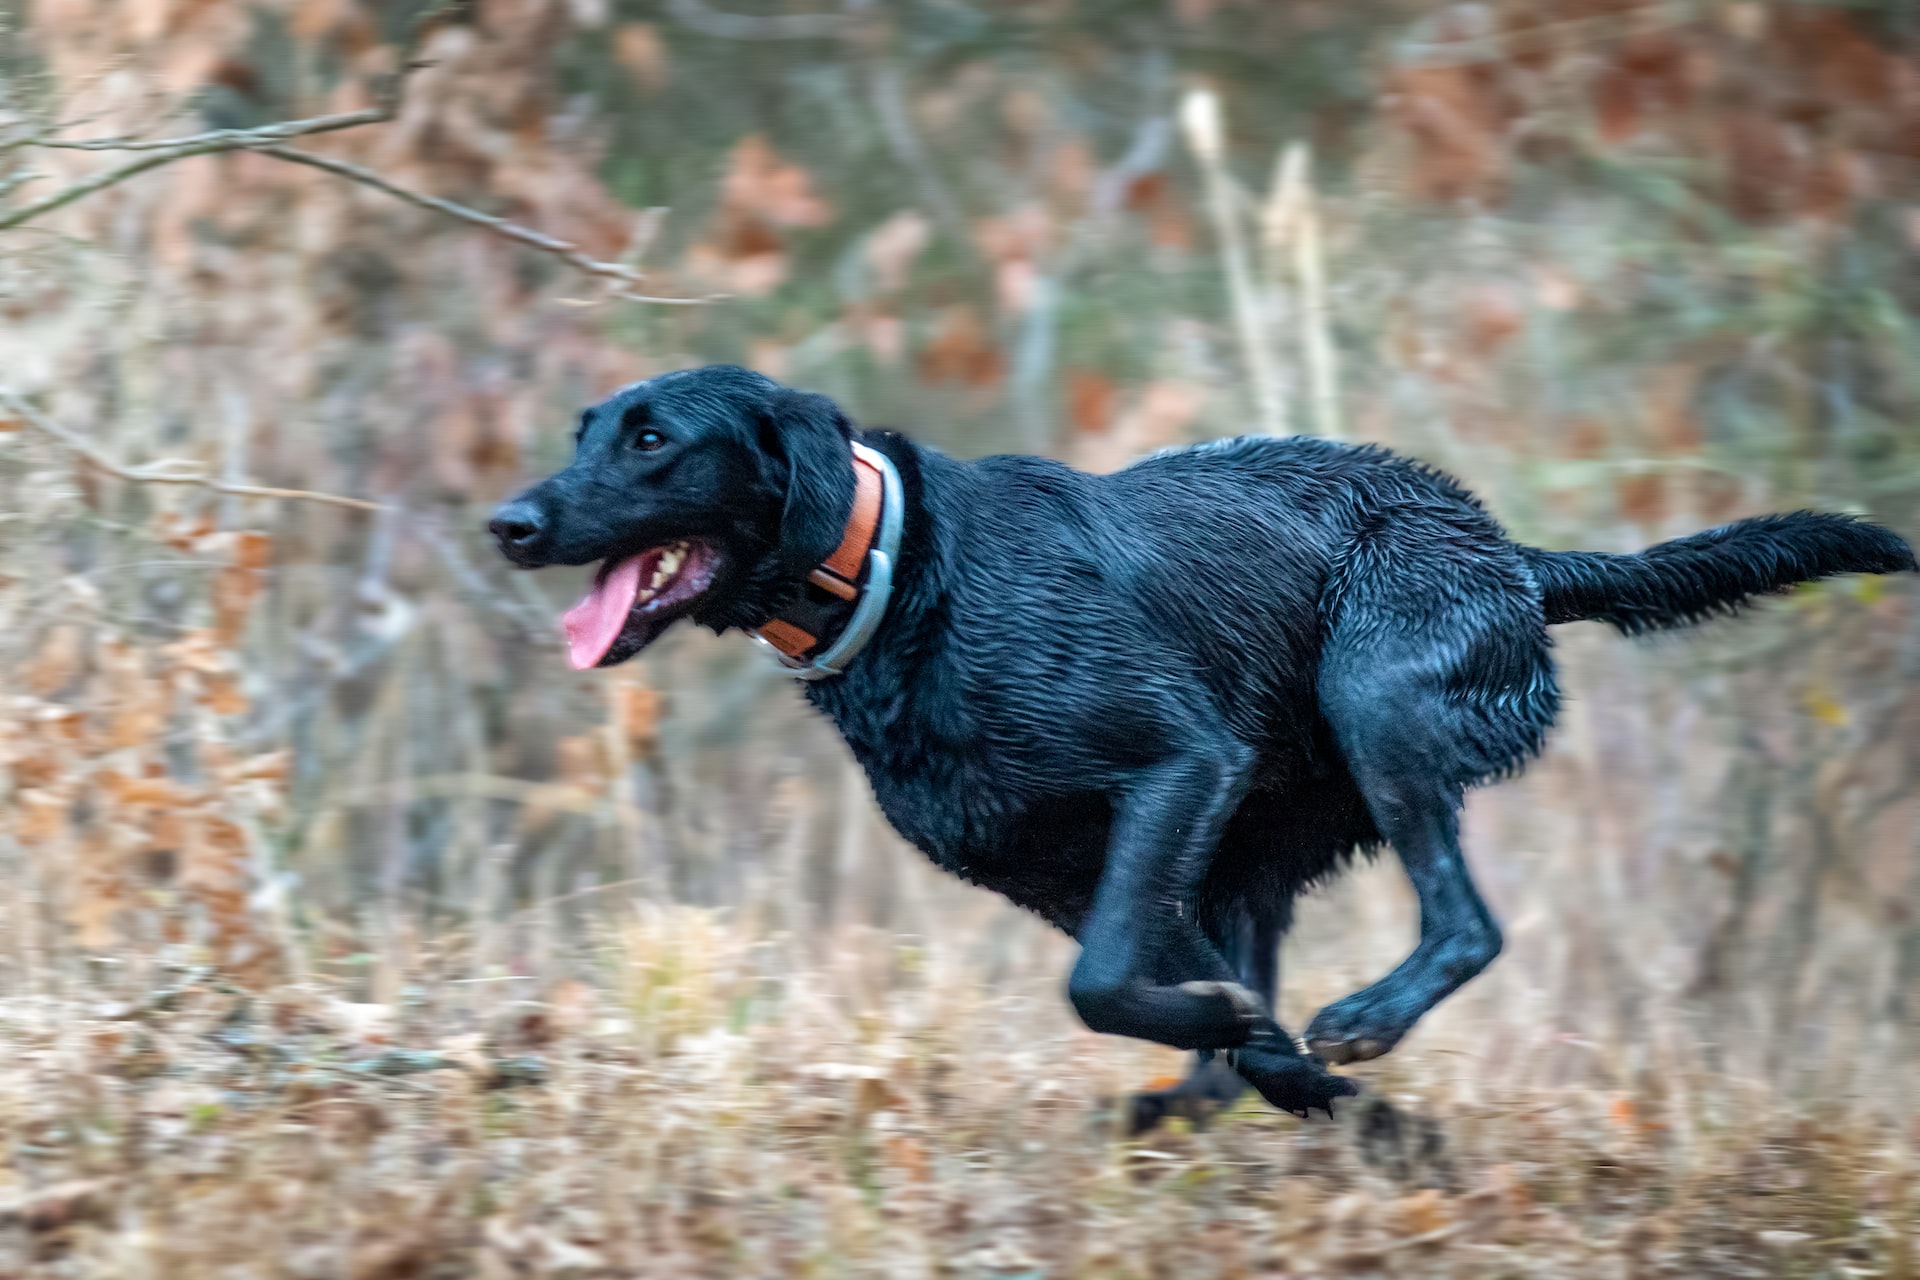 Black dog running with its tongue out